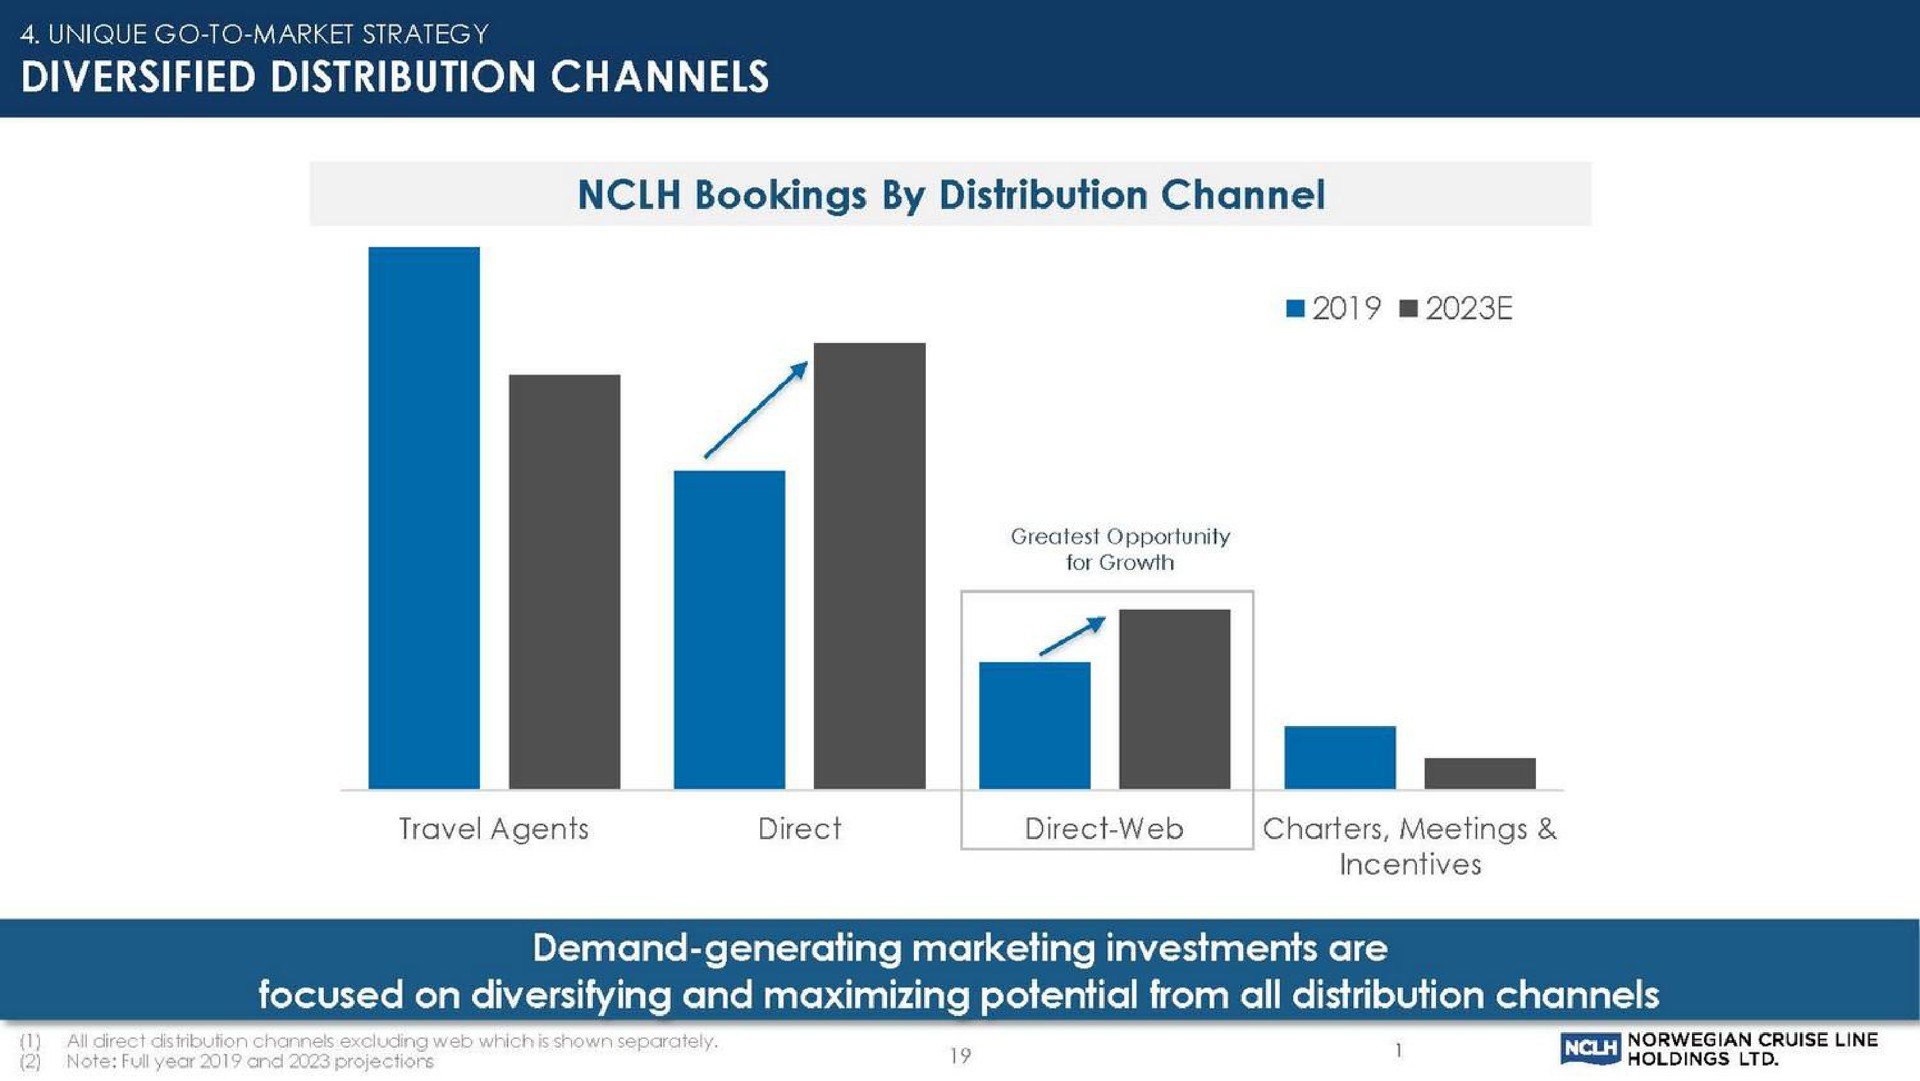 diversified distribution channels | Norwegian Cruise Line